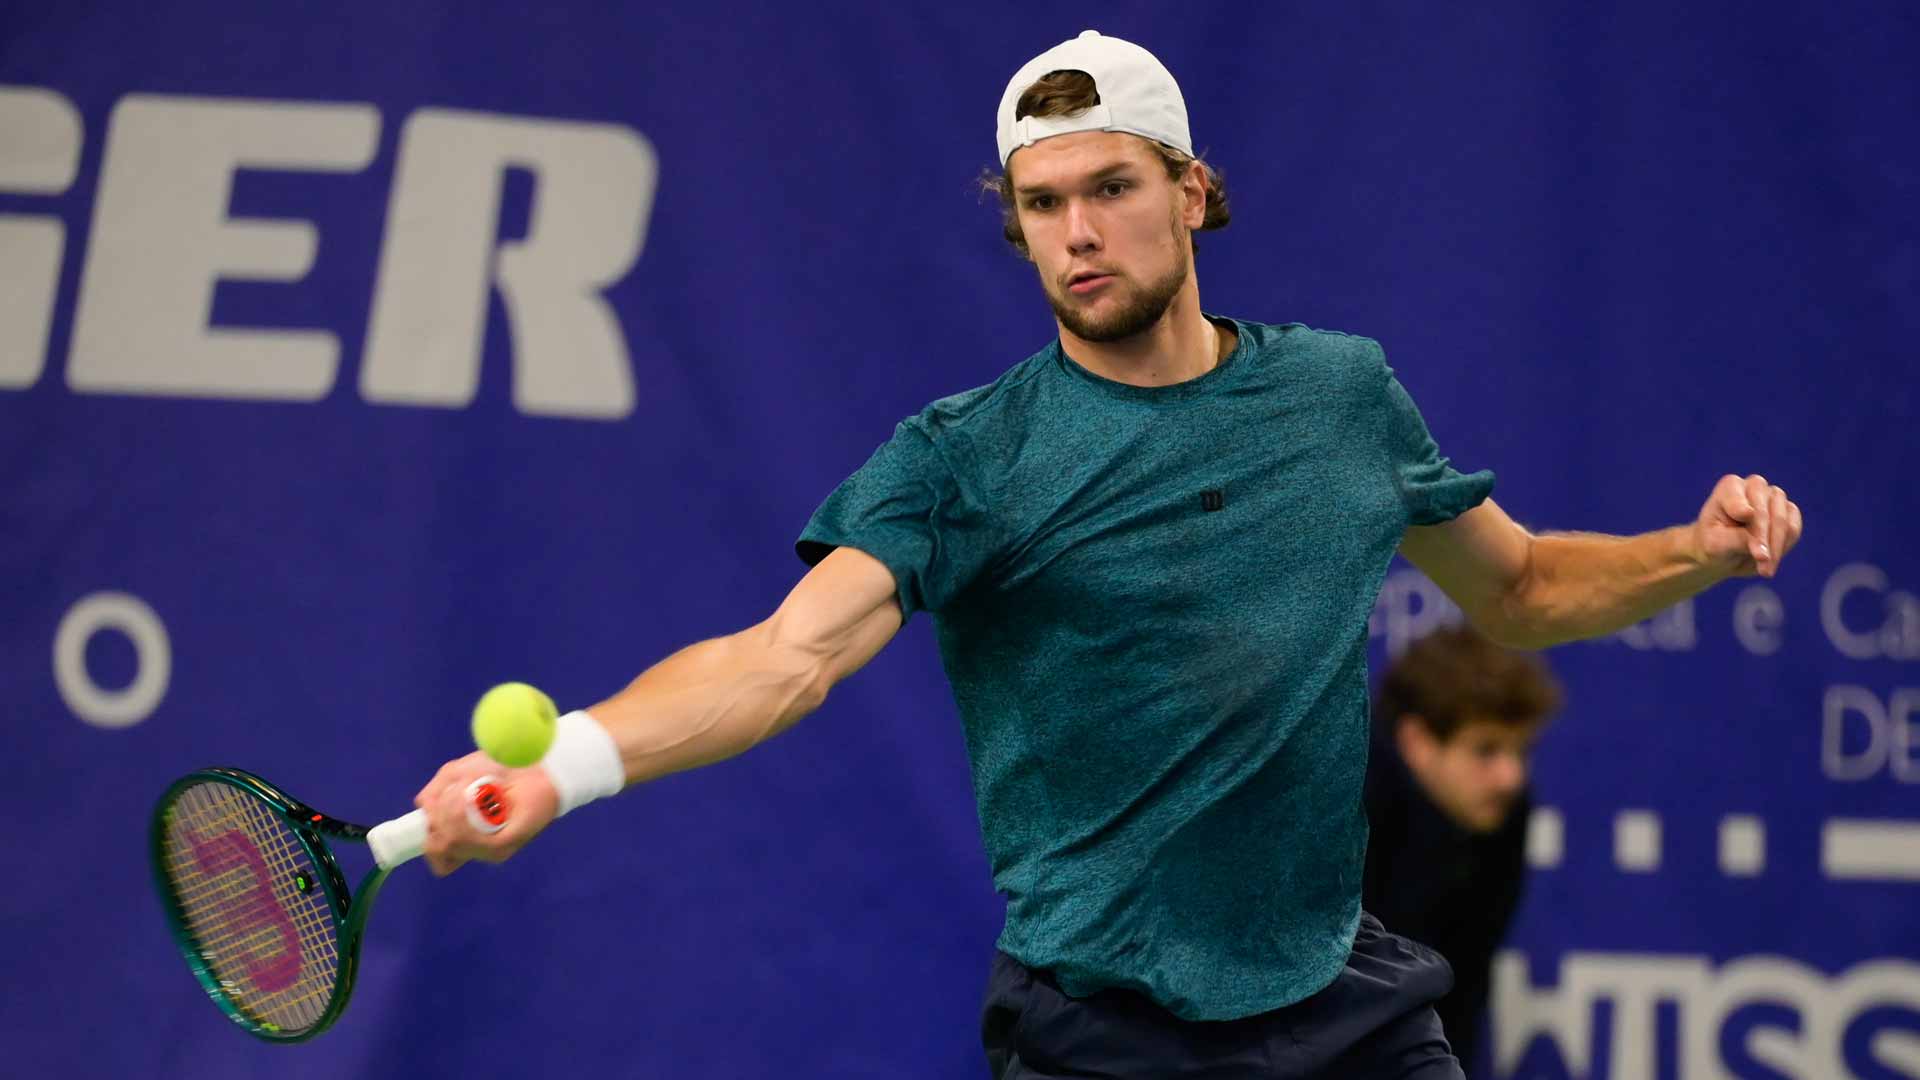 Otto Virtanen wins a two-hour, 41-minute final at the Lugano Challenger.